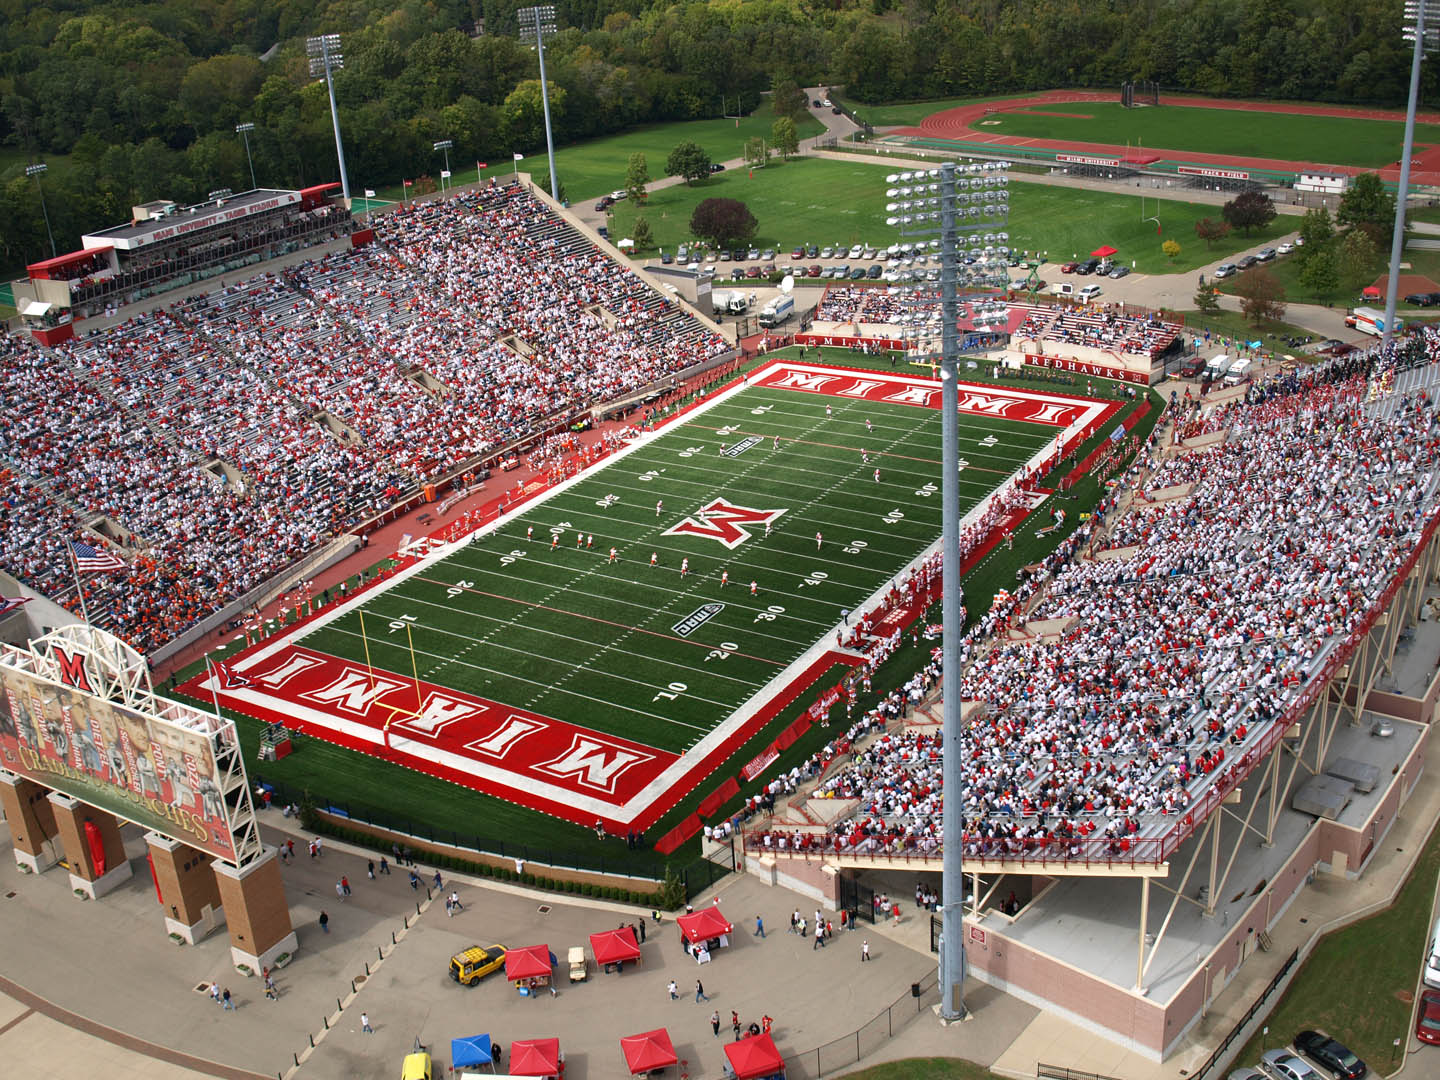 Fred Yager Stadium - Facts, figures, pictures and more of the Miami-OH Redhawks college football stadium